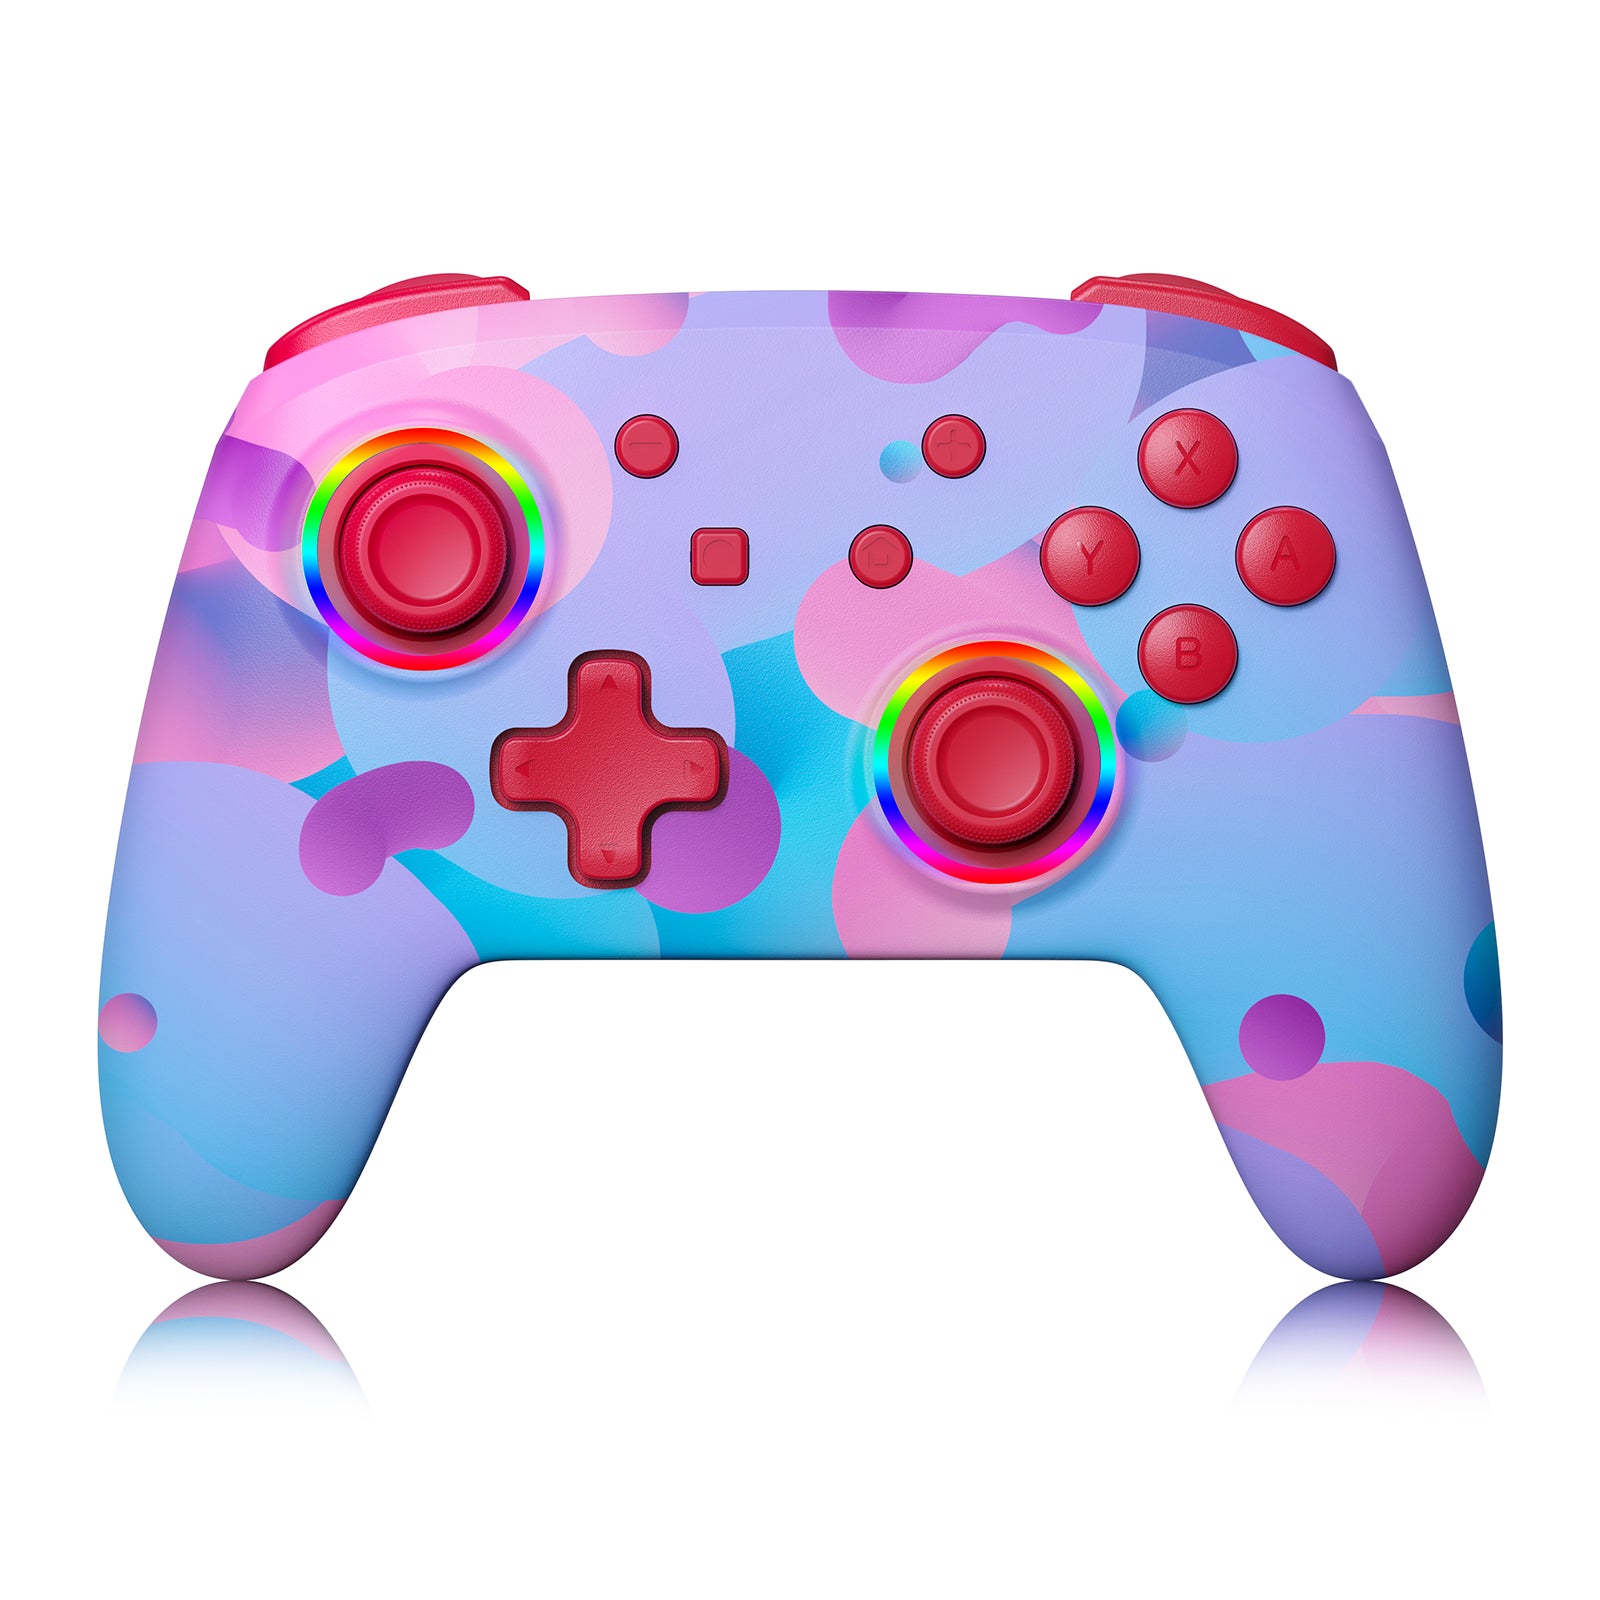 The image showcases a vibrant skin on the Bluetooth controller.